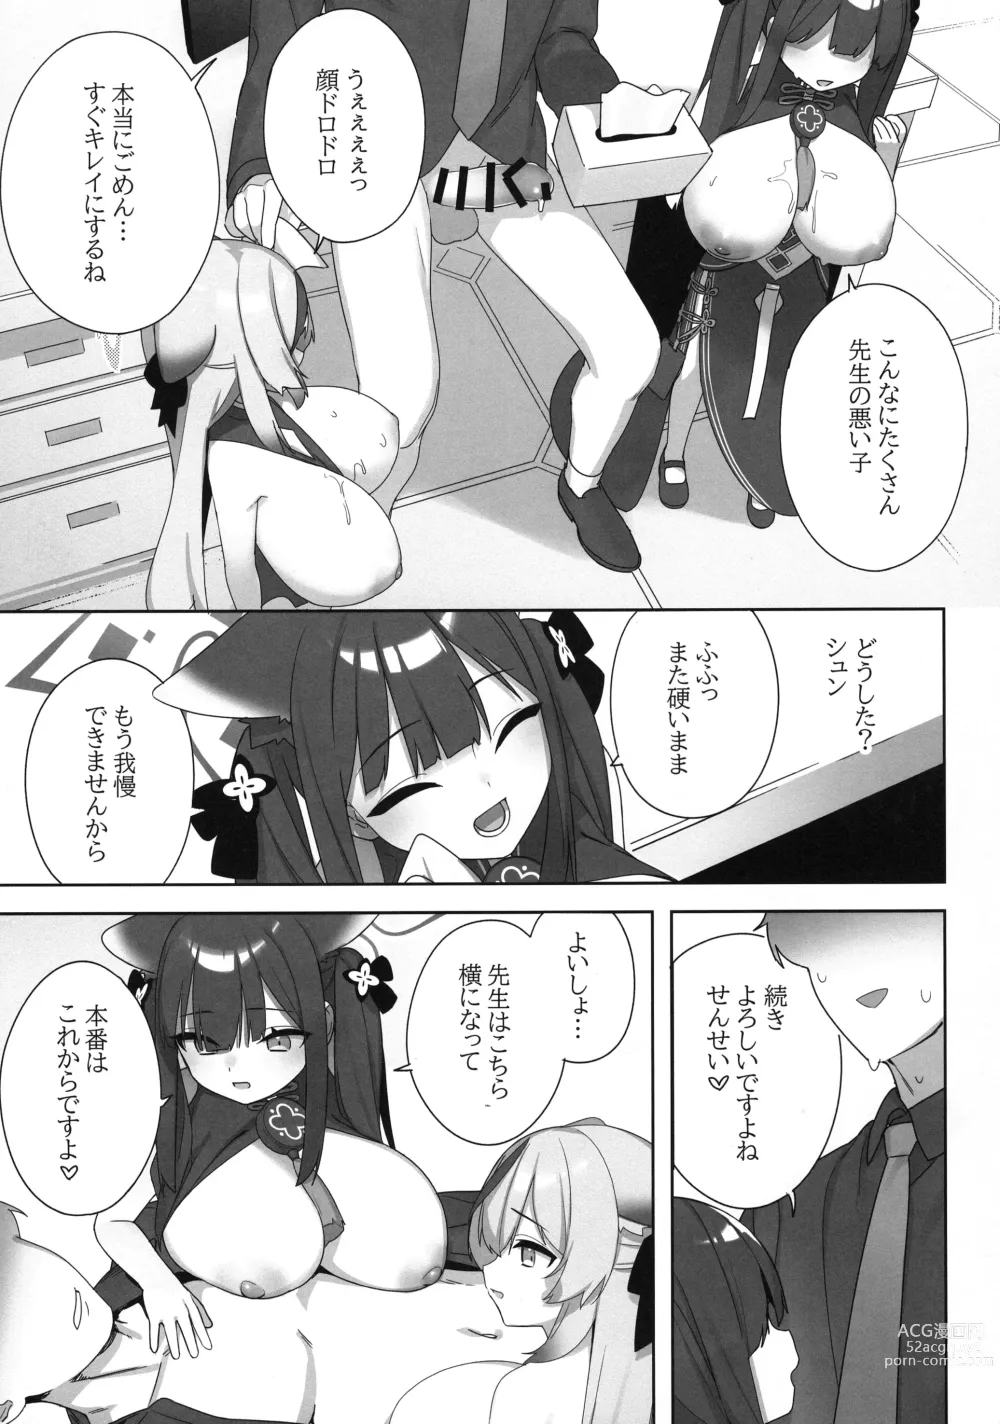 Page 11 of doujinshi Shuekoko Expansion - Live for oppai loli, Die for oppai loli